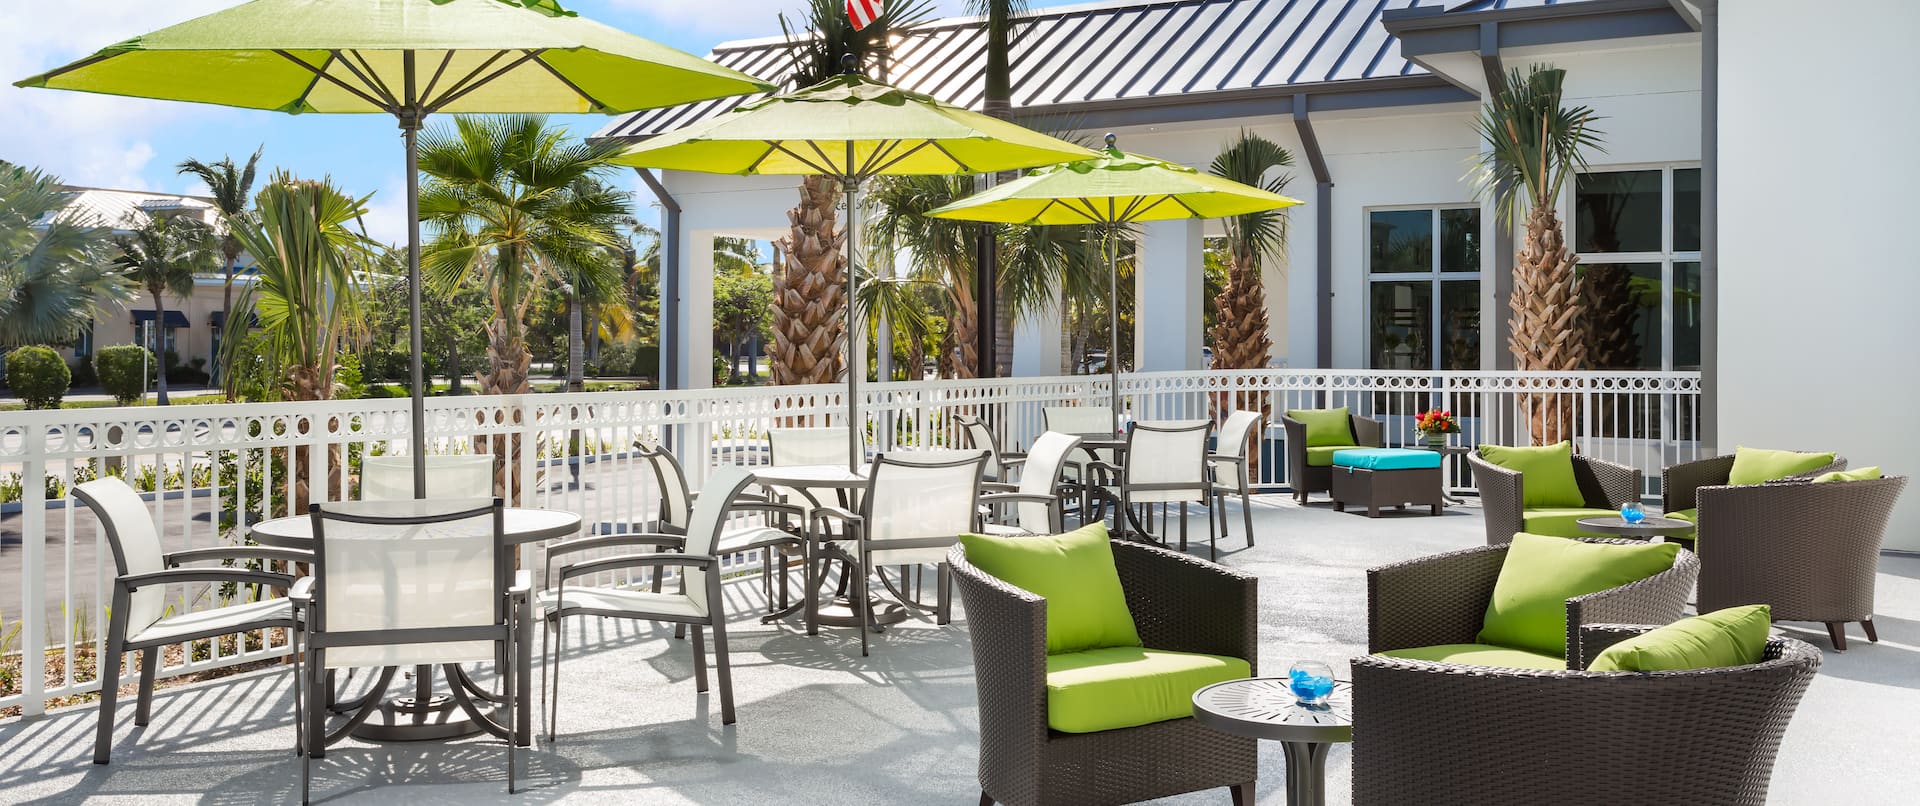 Outdoor seating area with tables, chairs and parasols